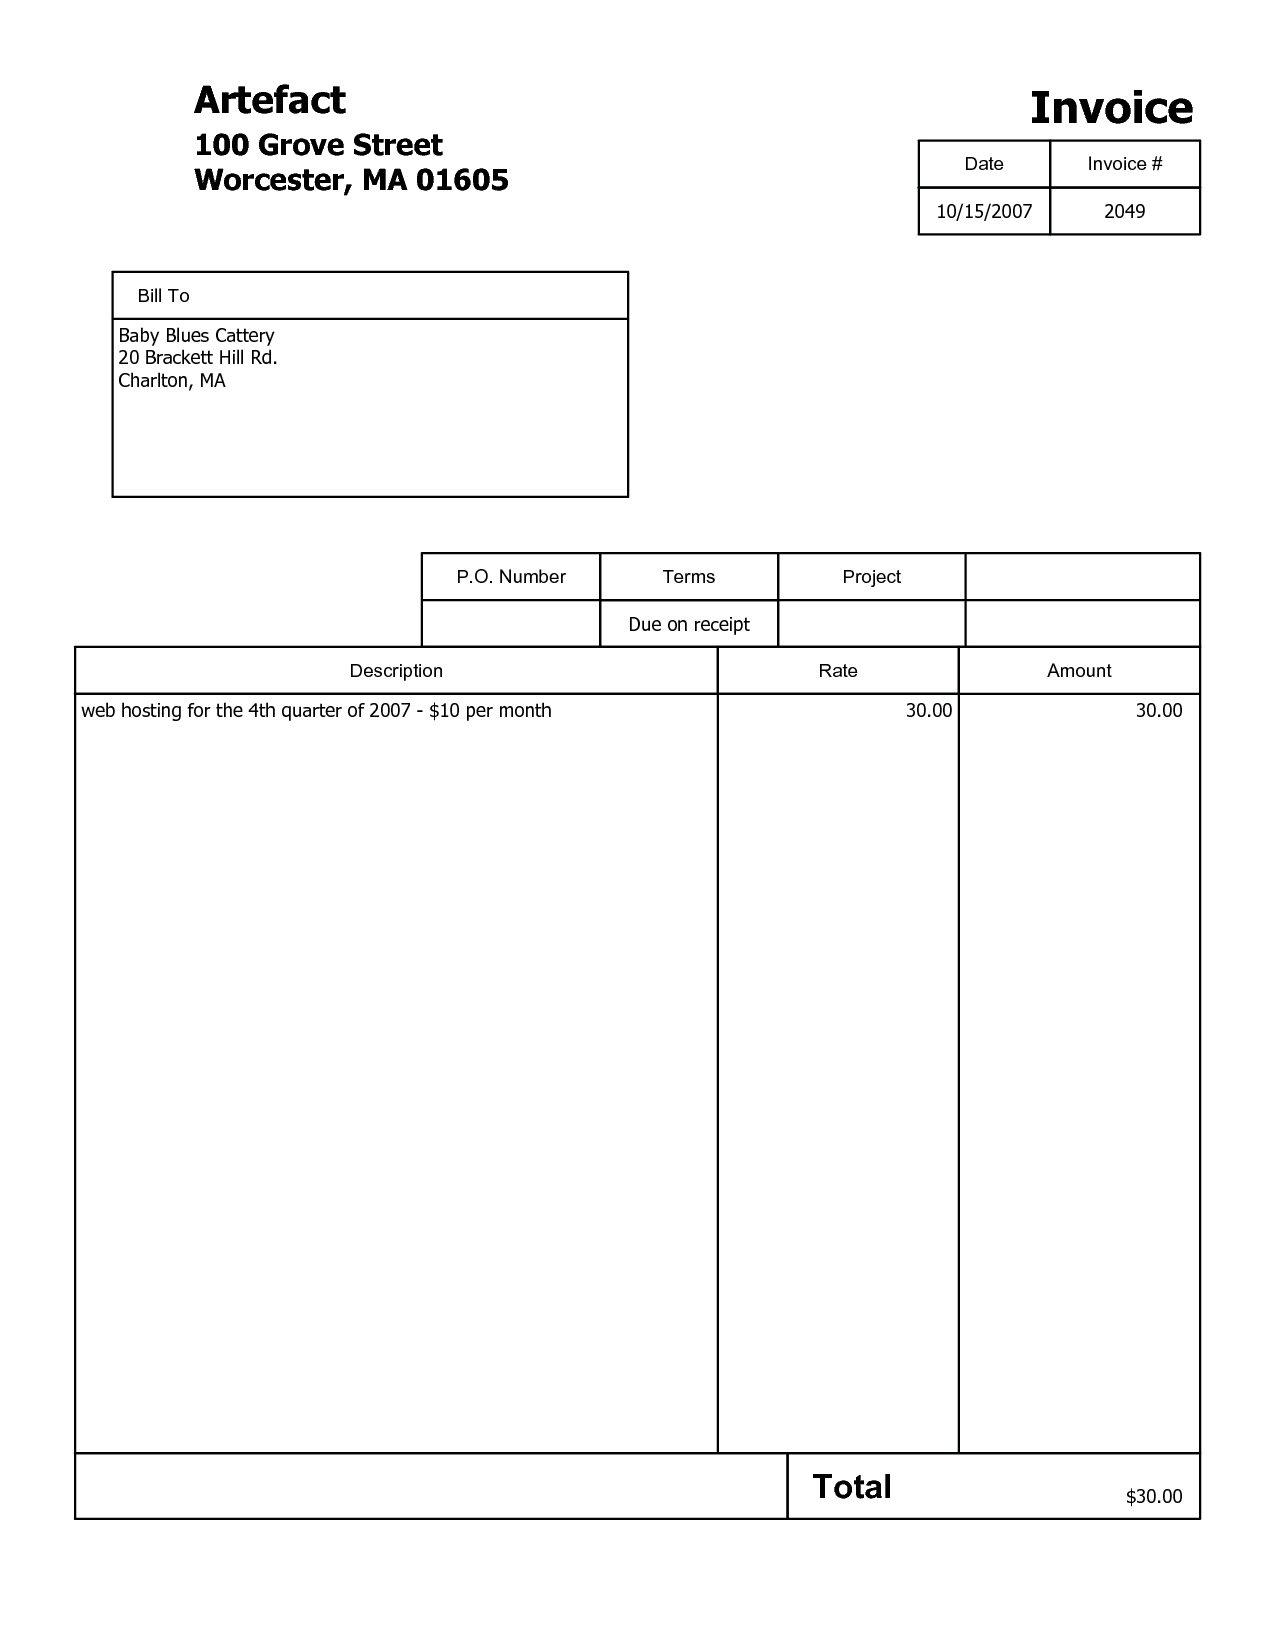 invoice factoring reviews all about invoice factoring reviews free editable invoice template pdf